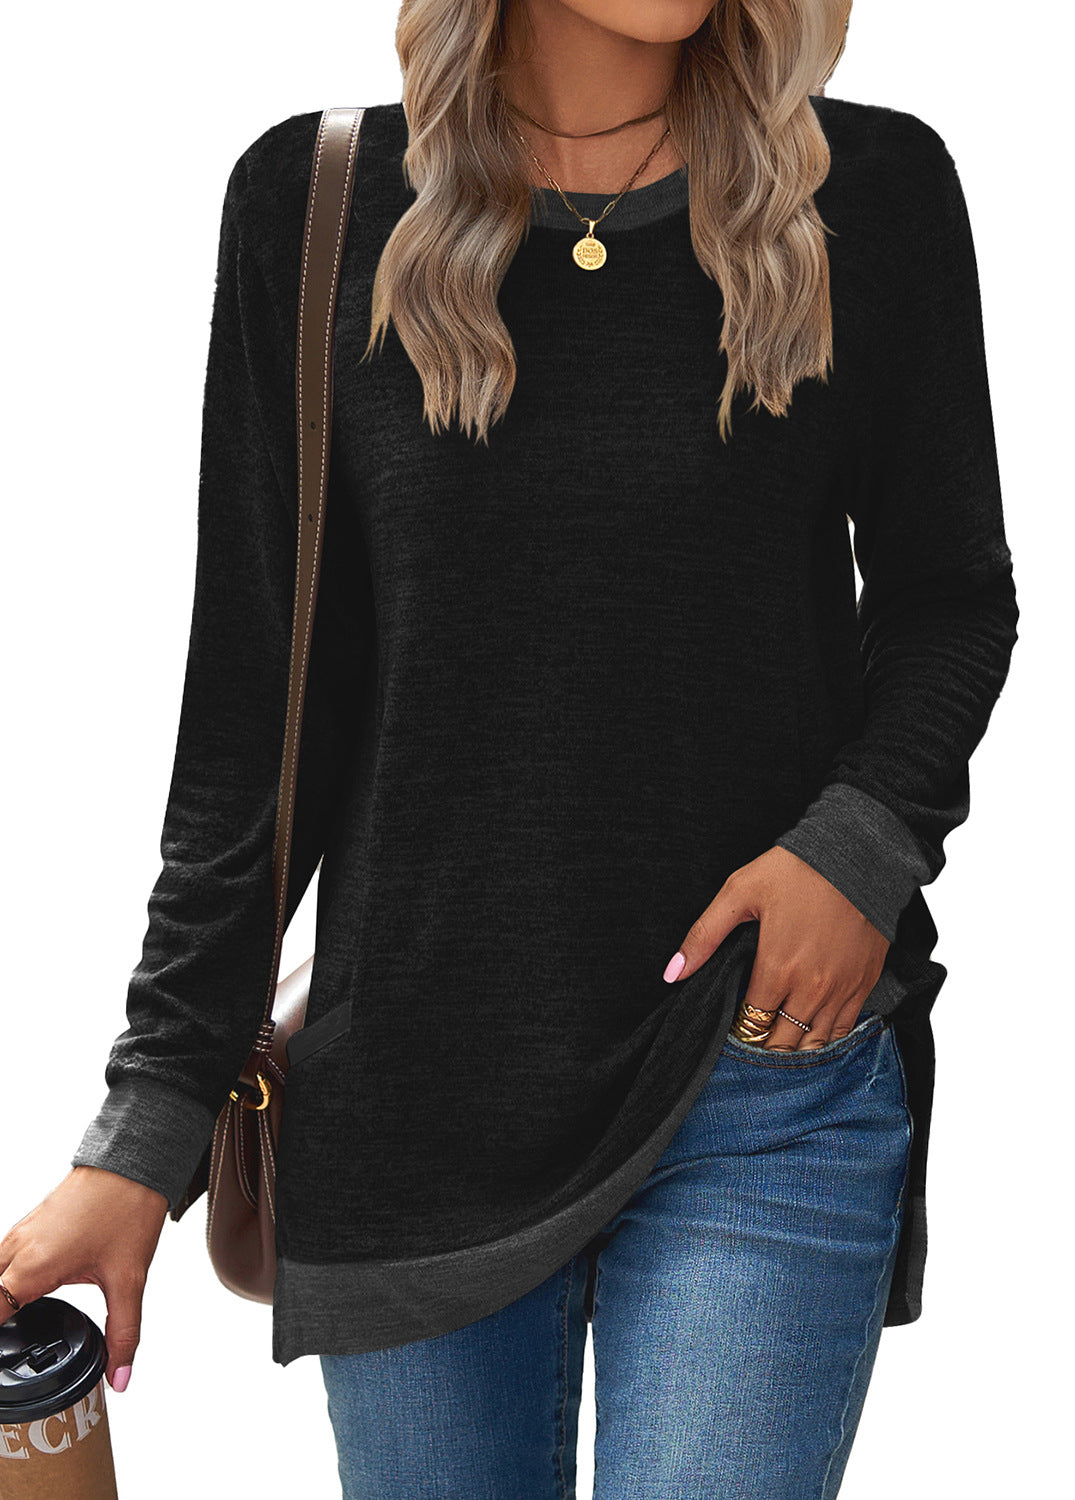 Round Neck Multicolor Pocket Long Sleeve Pullover Top Loose-fitting Casual T-shirt